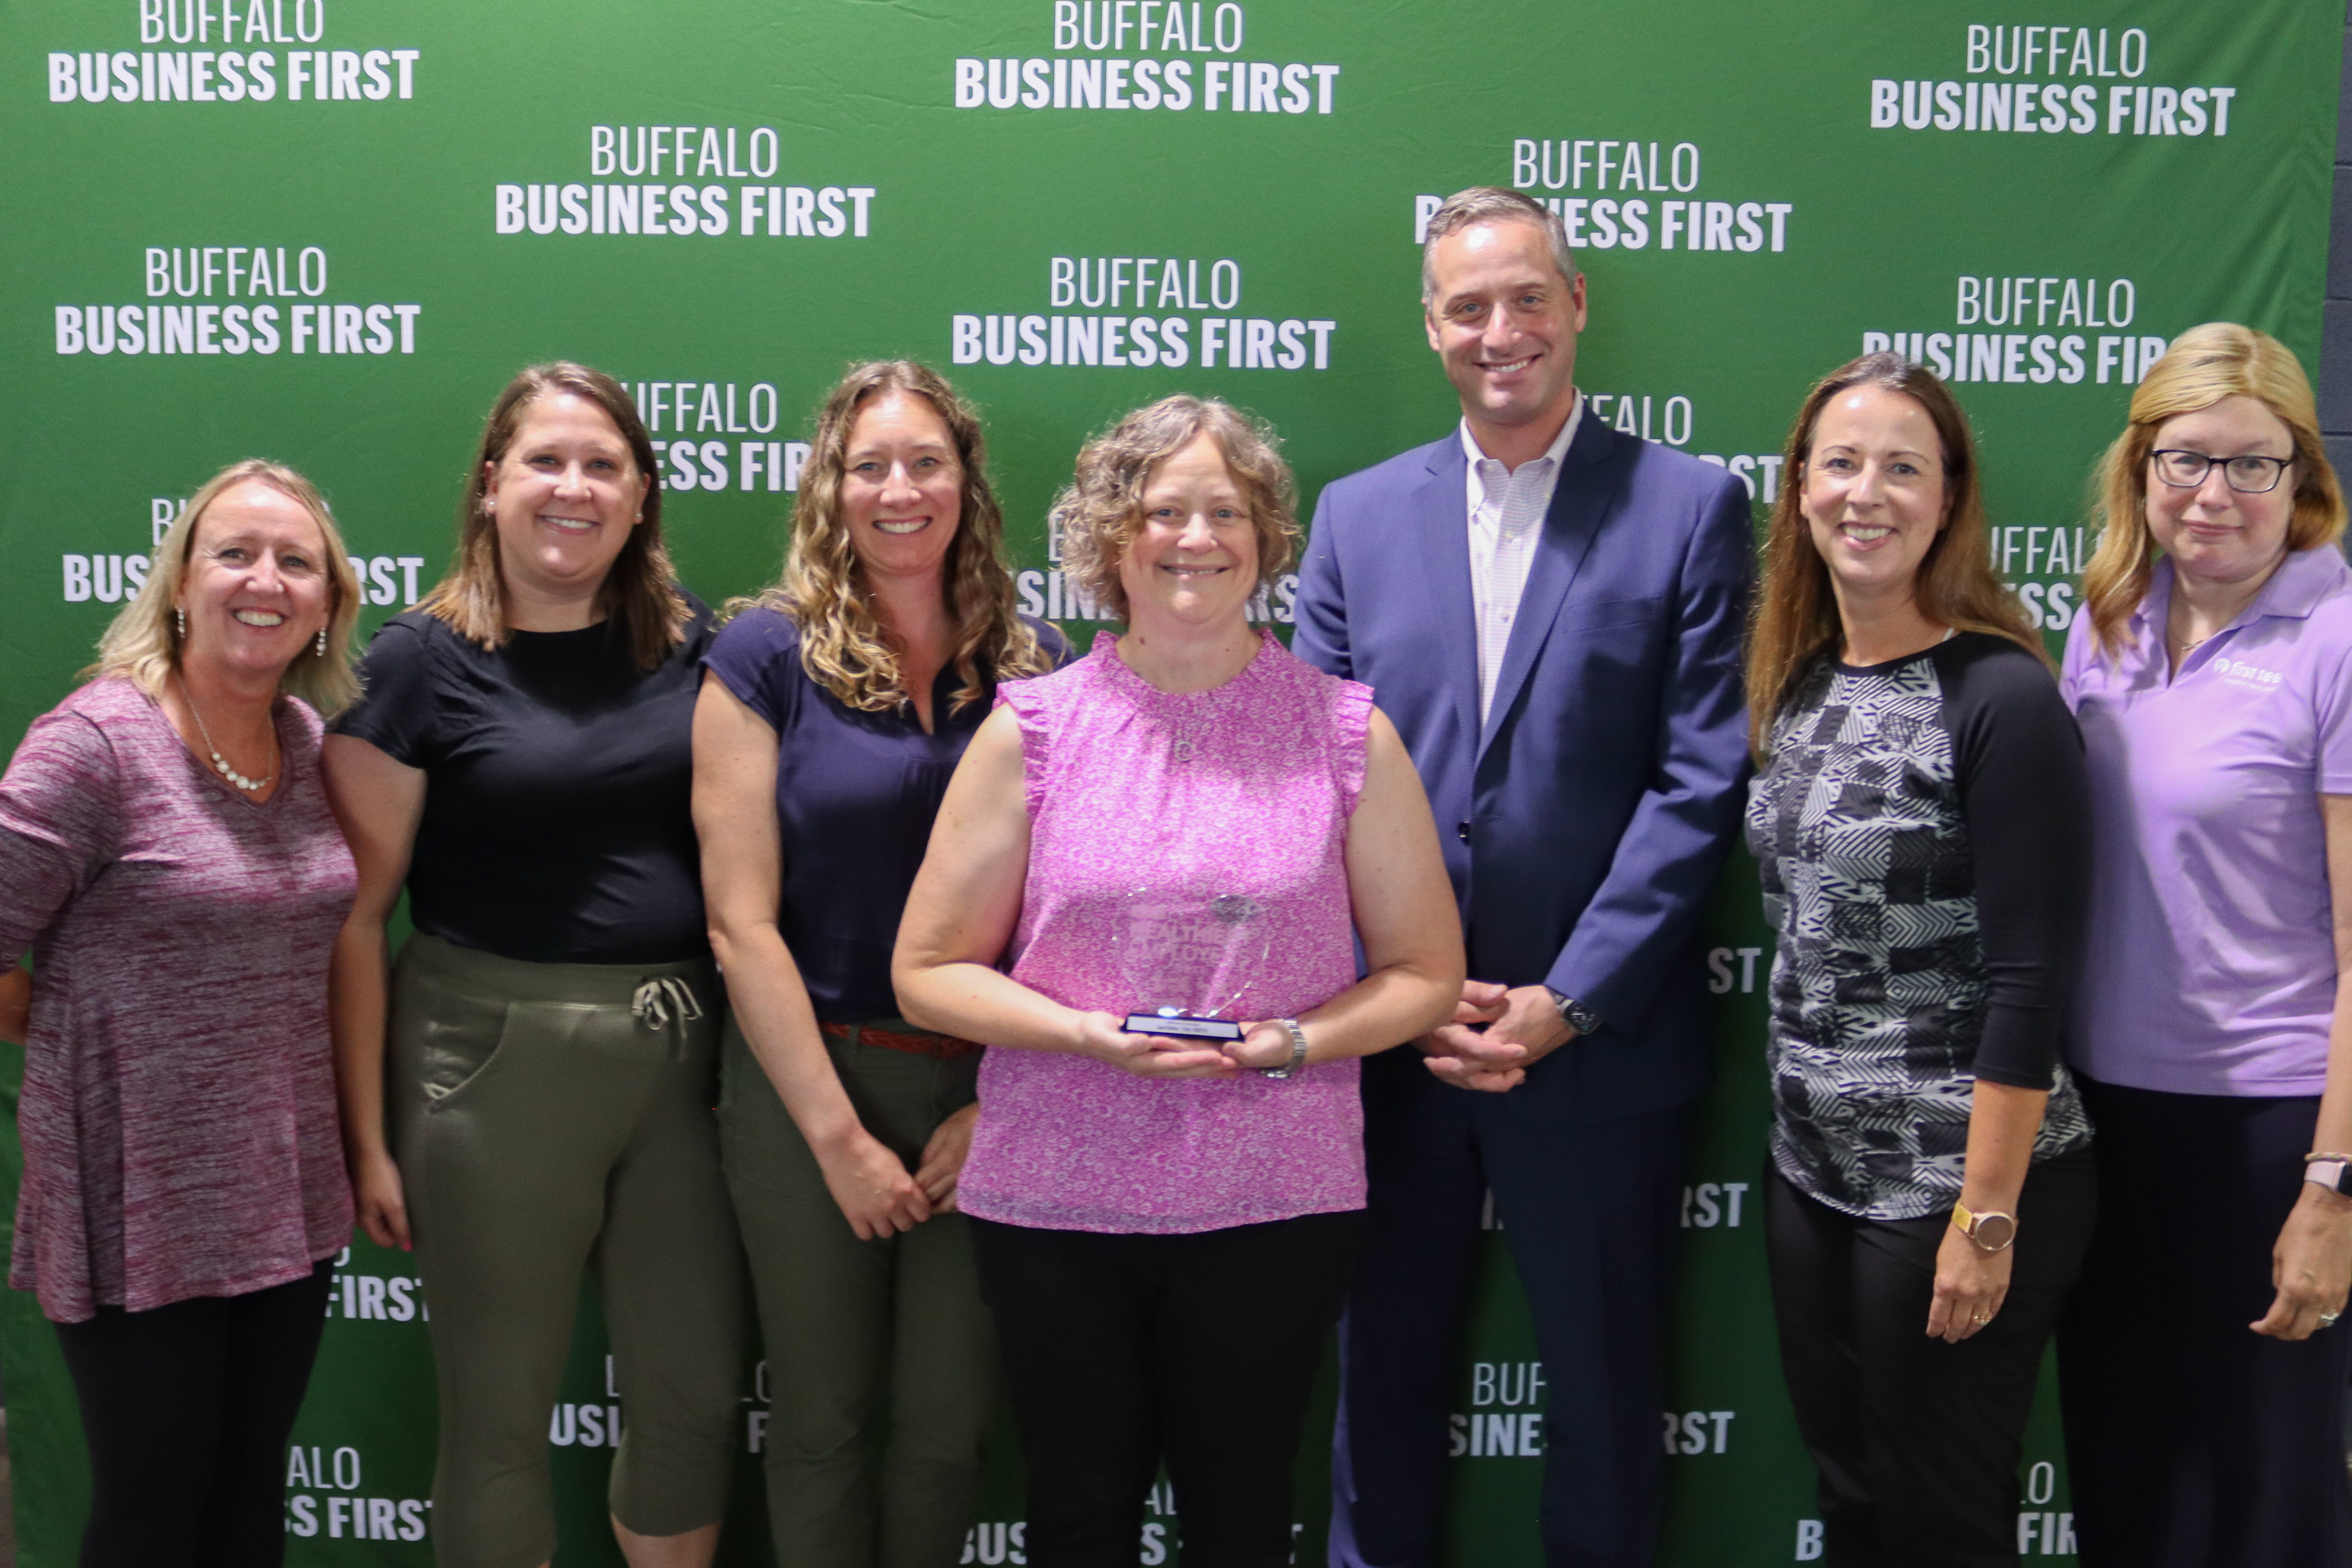 Kate Huber, holding award and Erie 1 BOCES employees pose in front of the Buffalo Business First logo